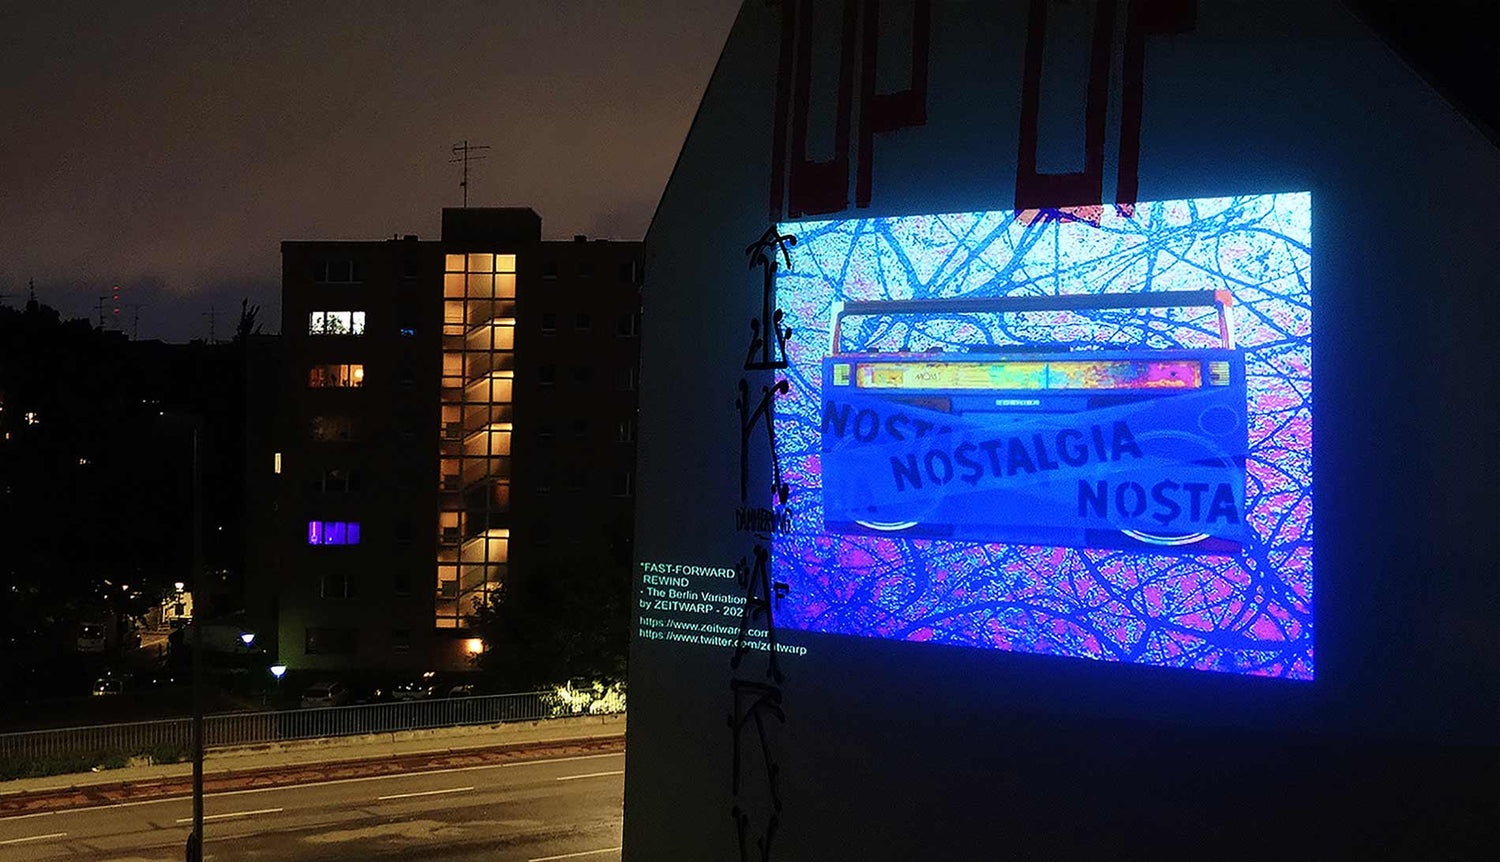 A digital art projection of the artwork 'FAST FORWARD / REWIND' on a building in Berlin at night